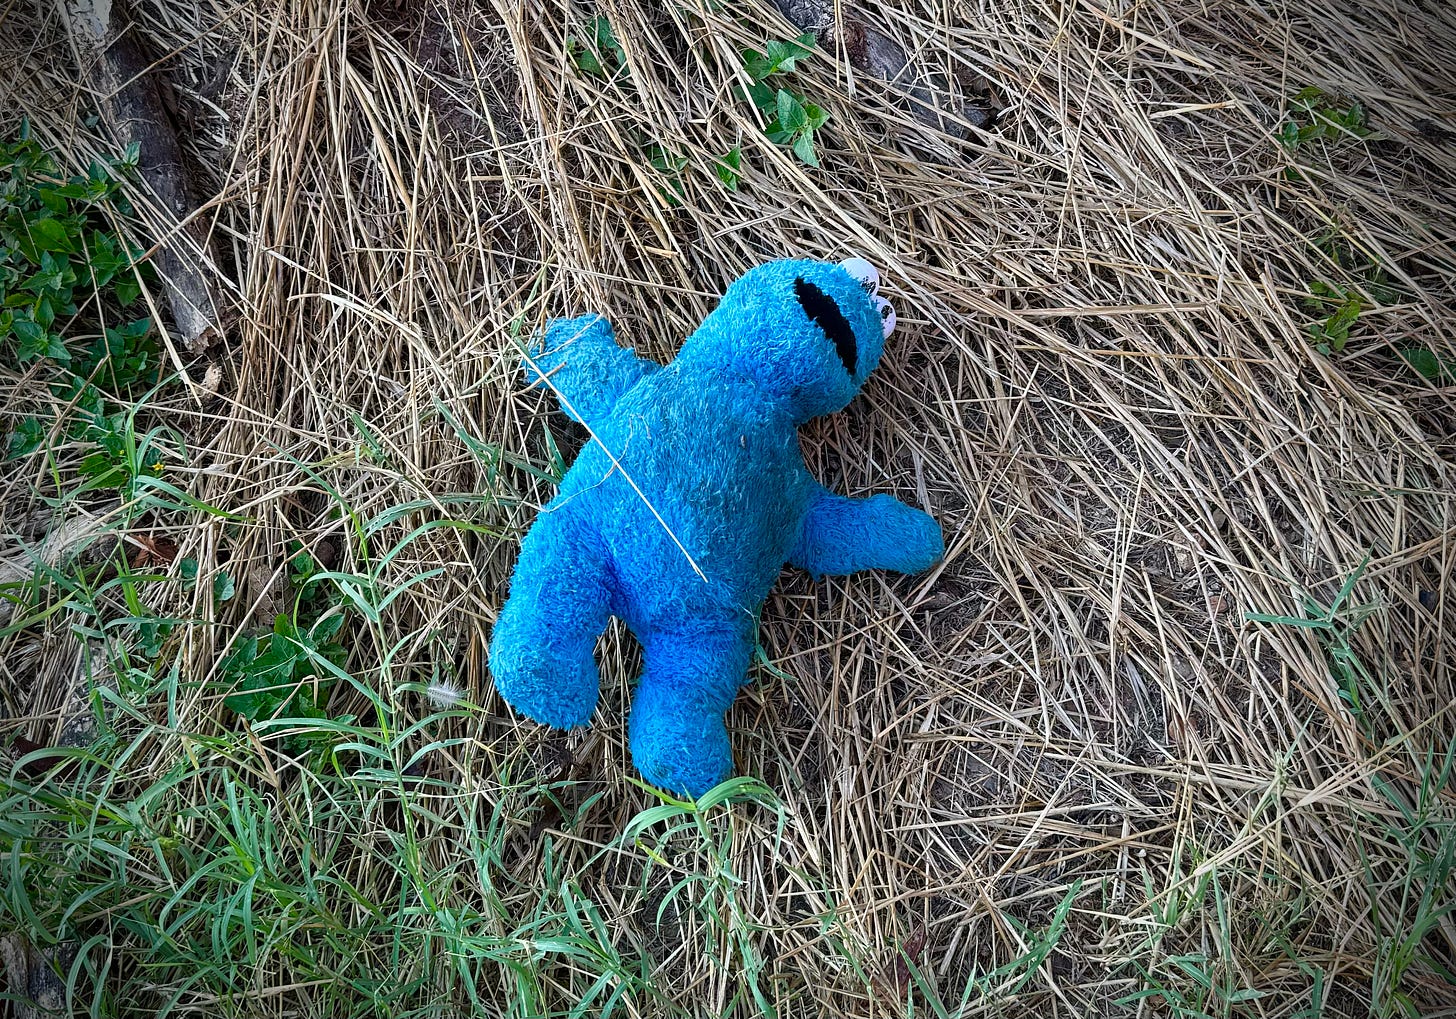 Cookie Monster in the grass